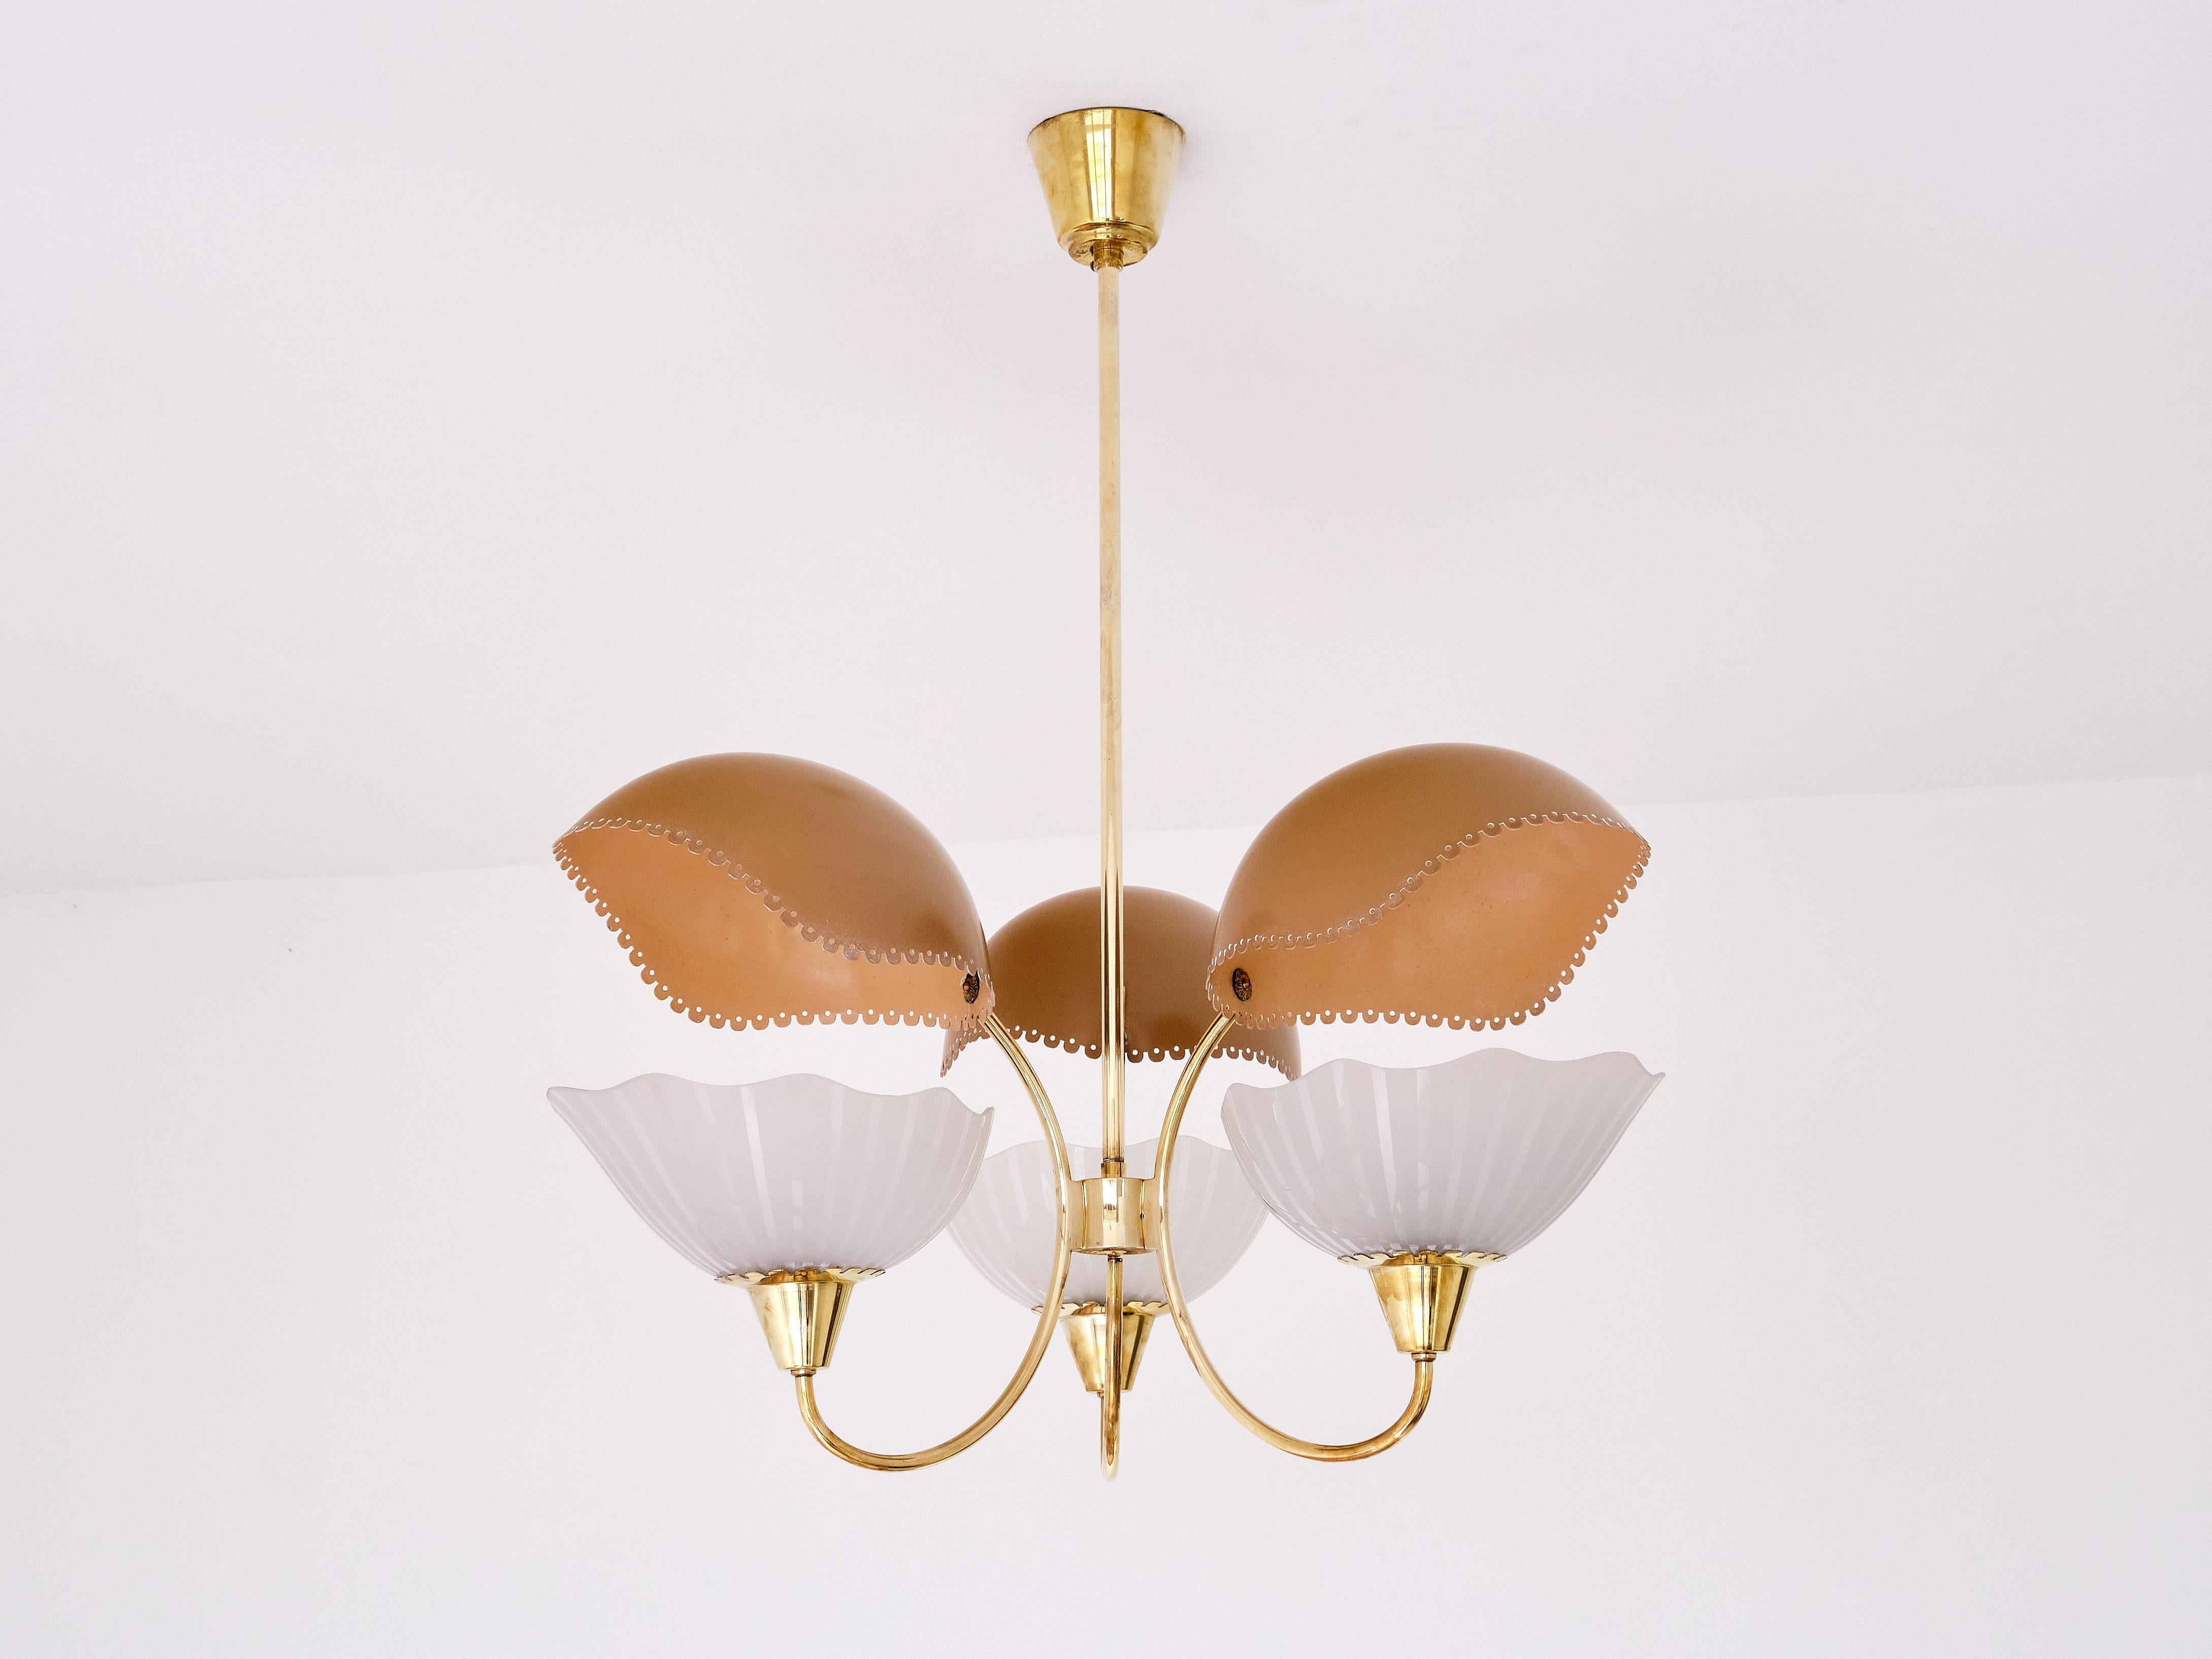 This exceptional chandelier was designed by Harald Notini and produced by Arvid Böhlmarks Lampvarufabrik in Sweden in the 1940s.

The striking design consists of three striped and etched glass shades with a slightly undulating, scalloped rim. The